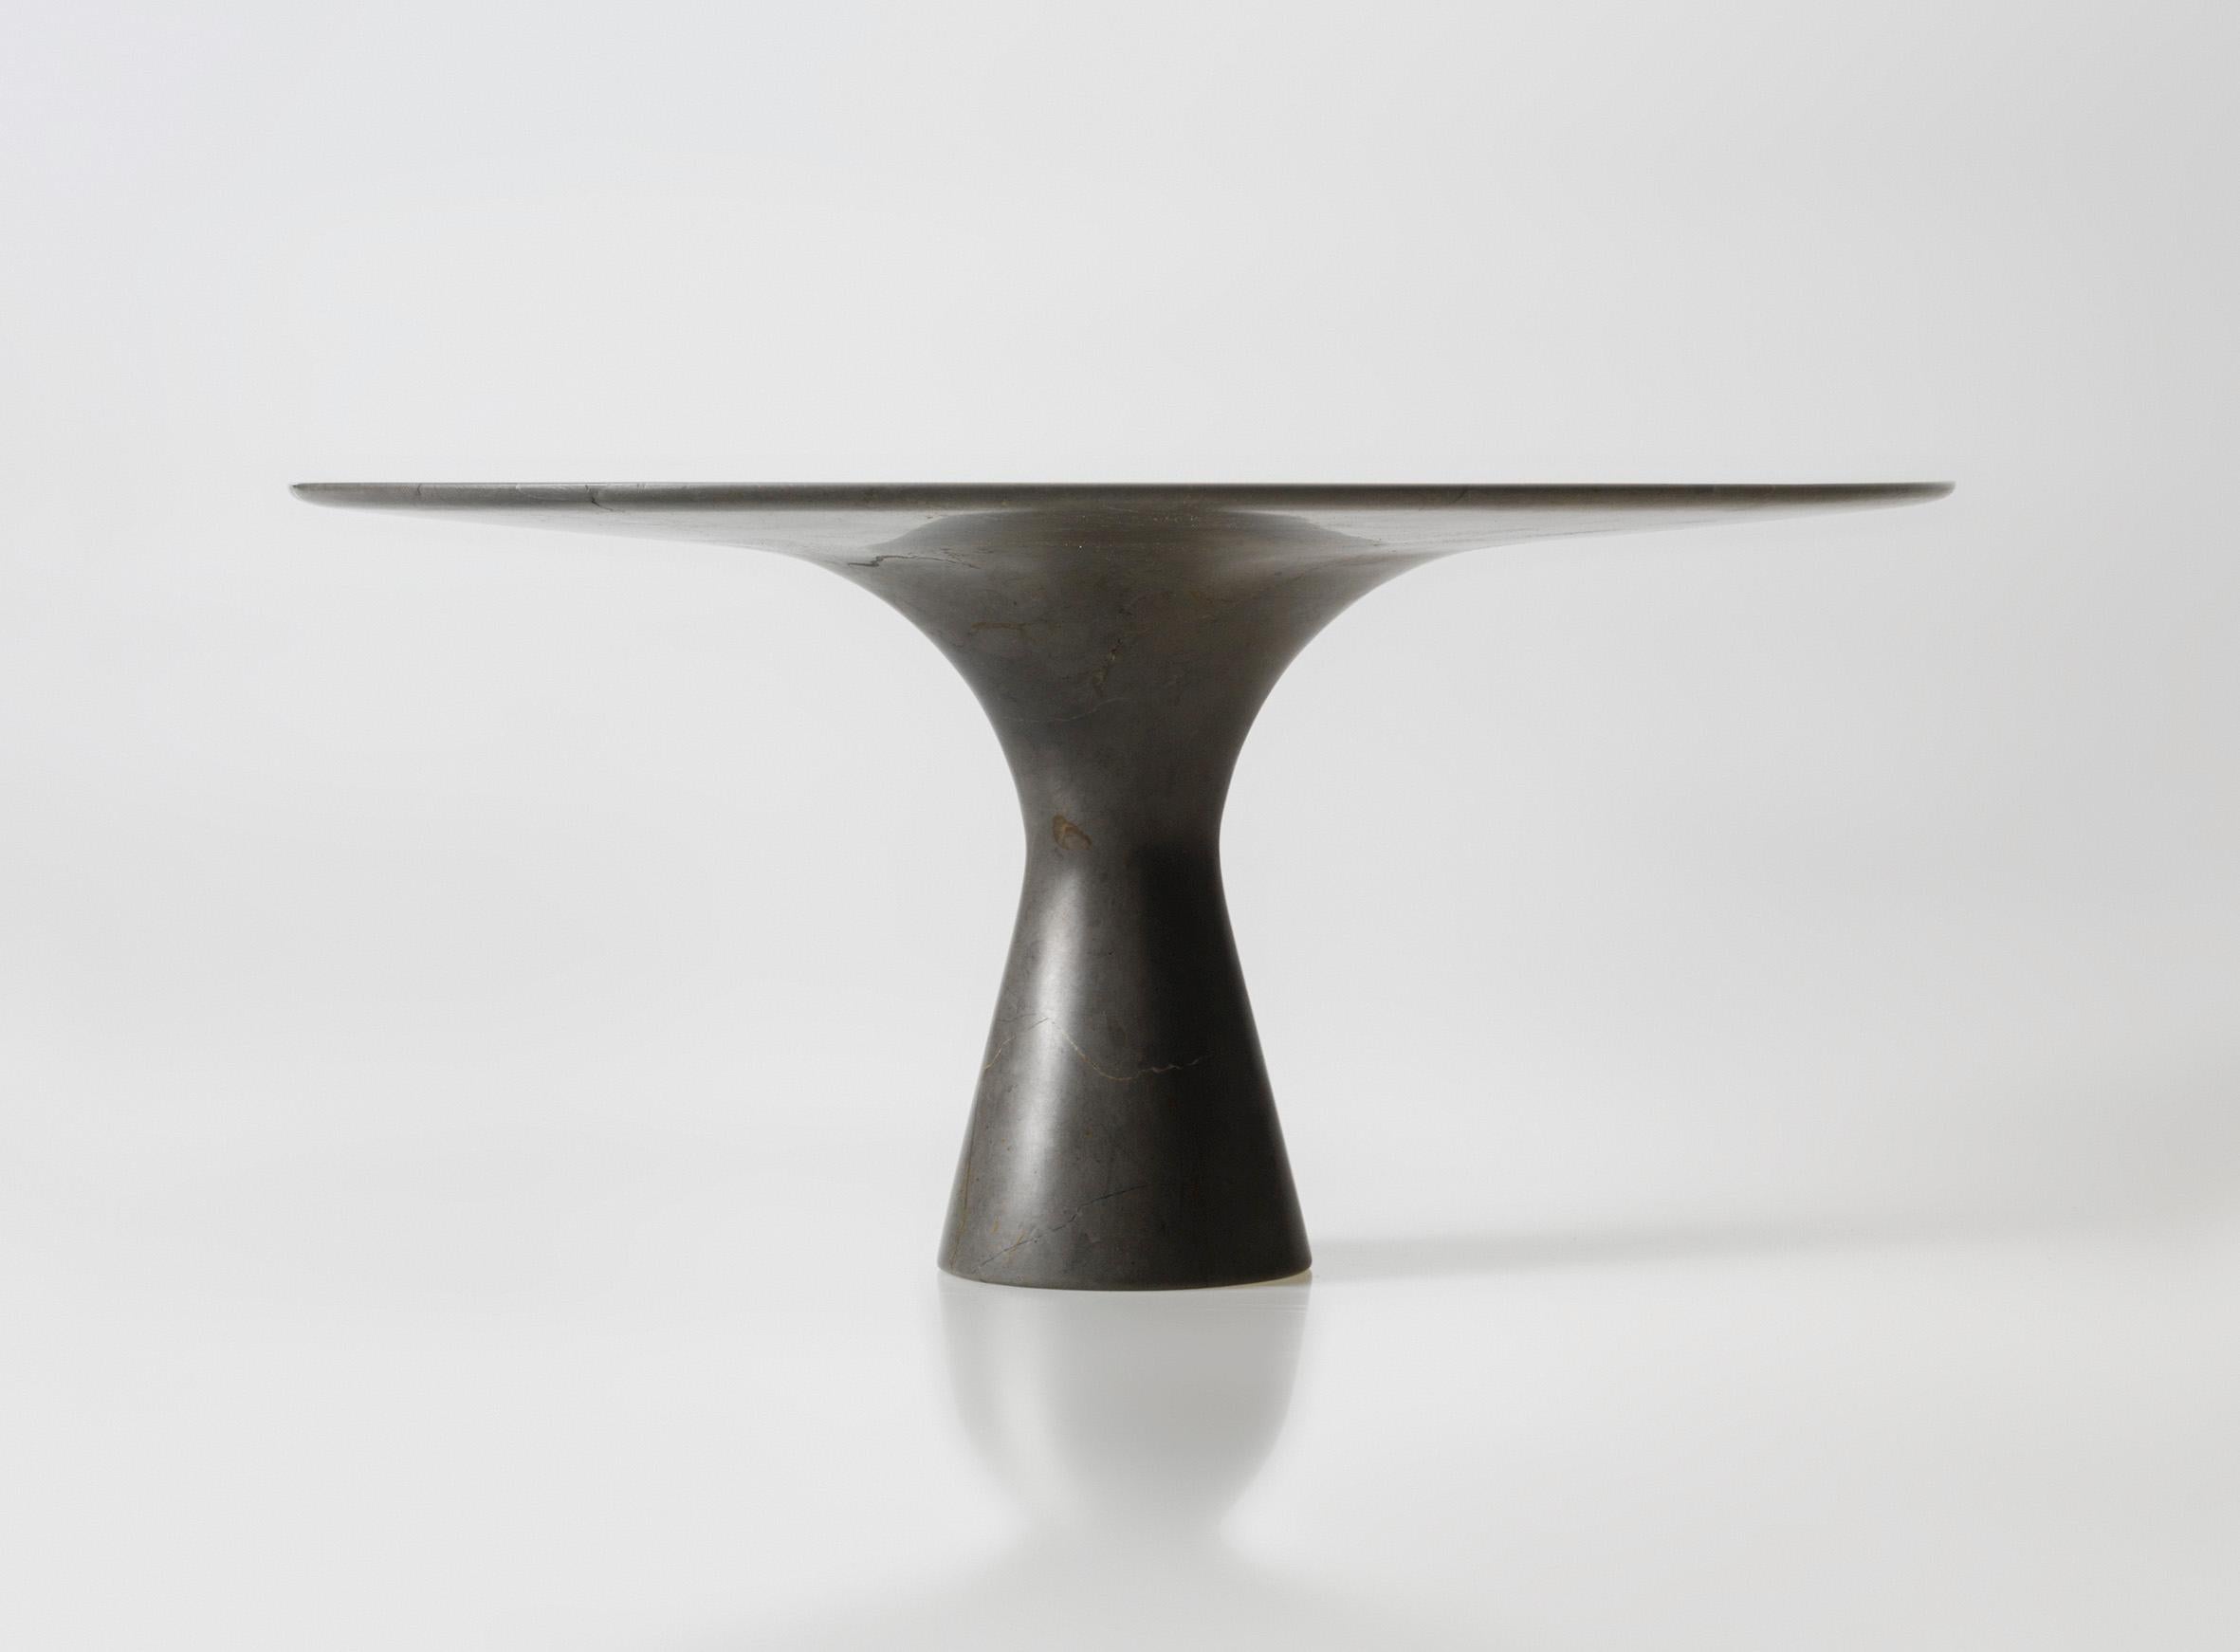 Grafite refined contemporary marble dining table 160/75
Dimensions: 160 x 75 cm
Materials: Grafite

Angelo is the essence of a round table in natural stone, a sculptural shape in robust material with elegant lines and refined finishes.

The